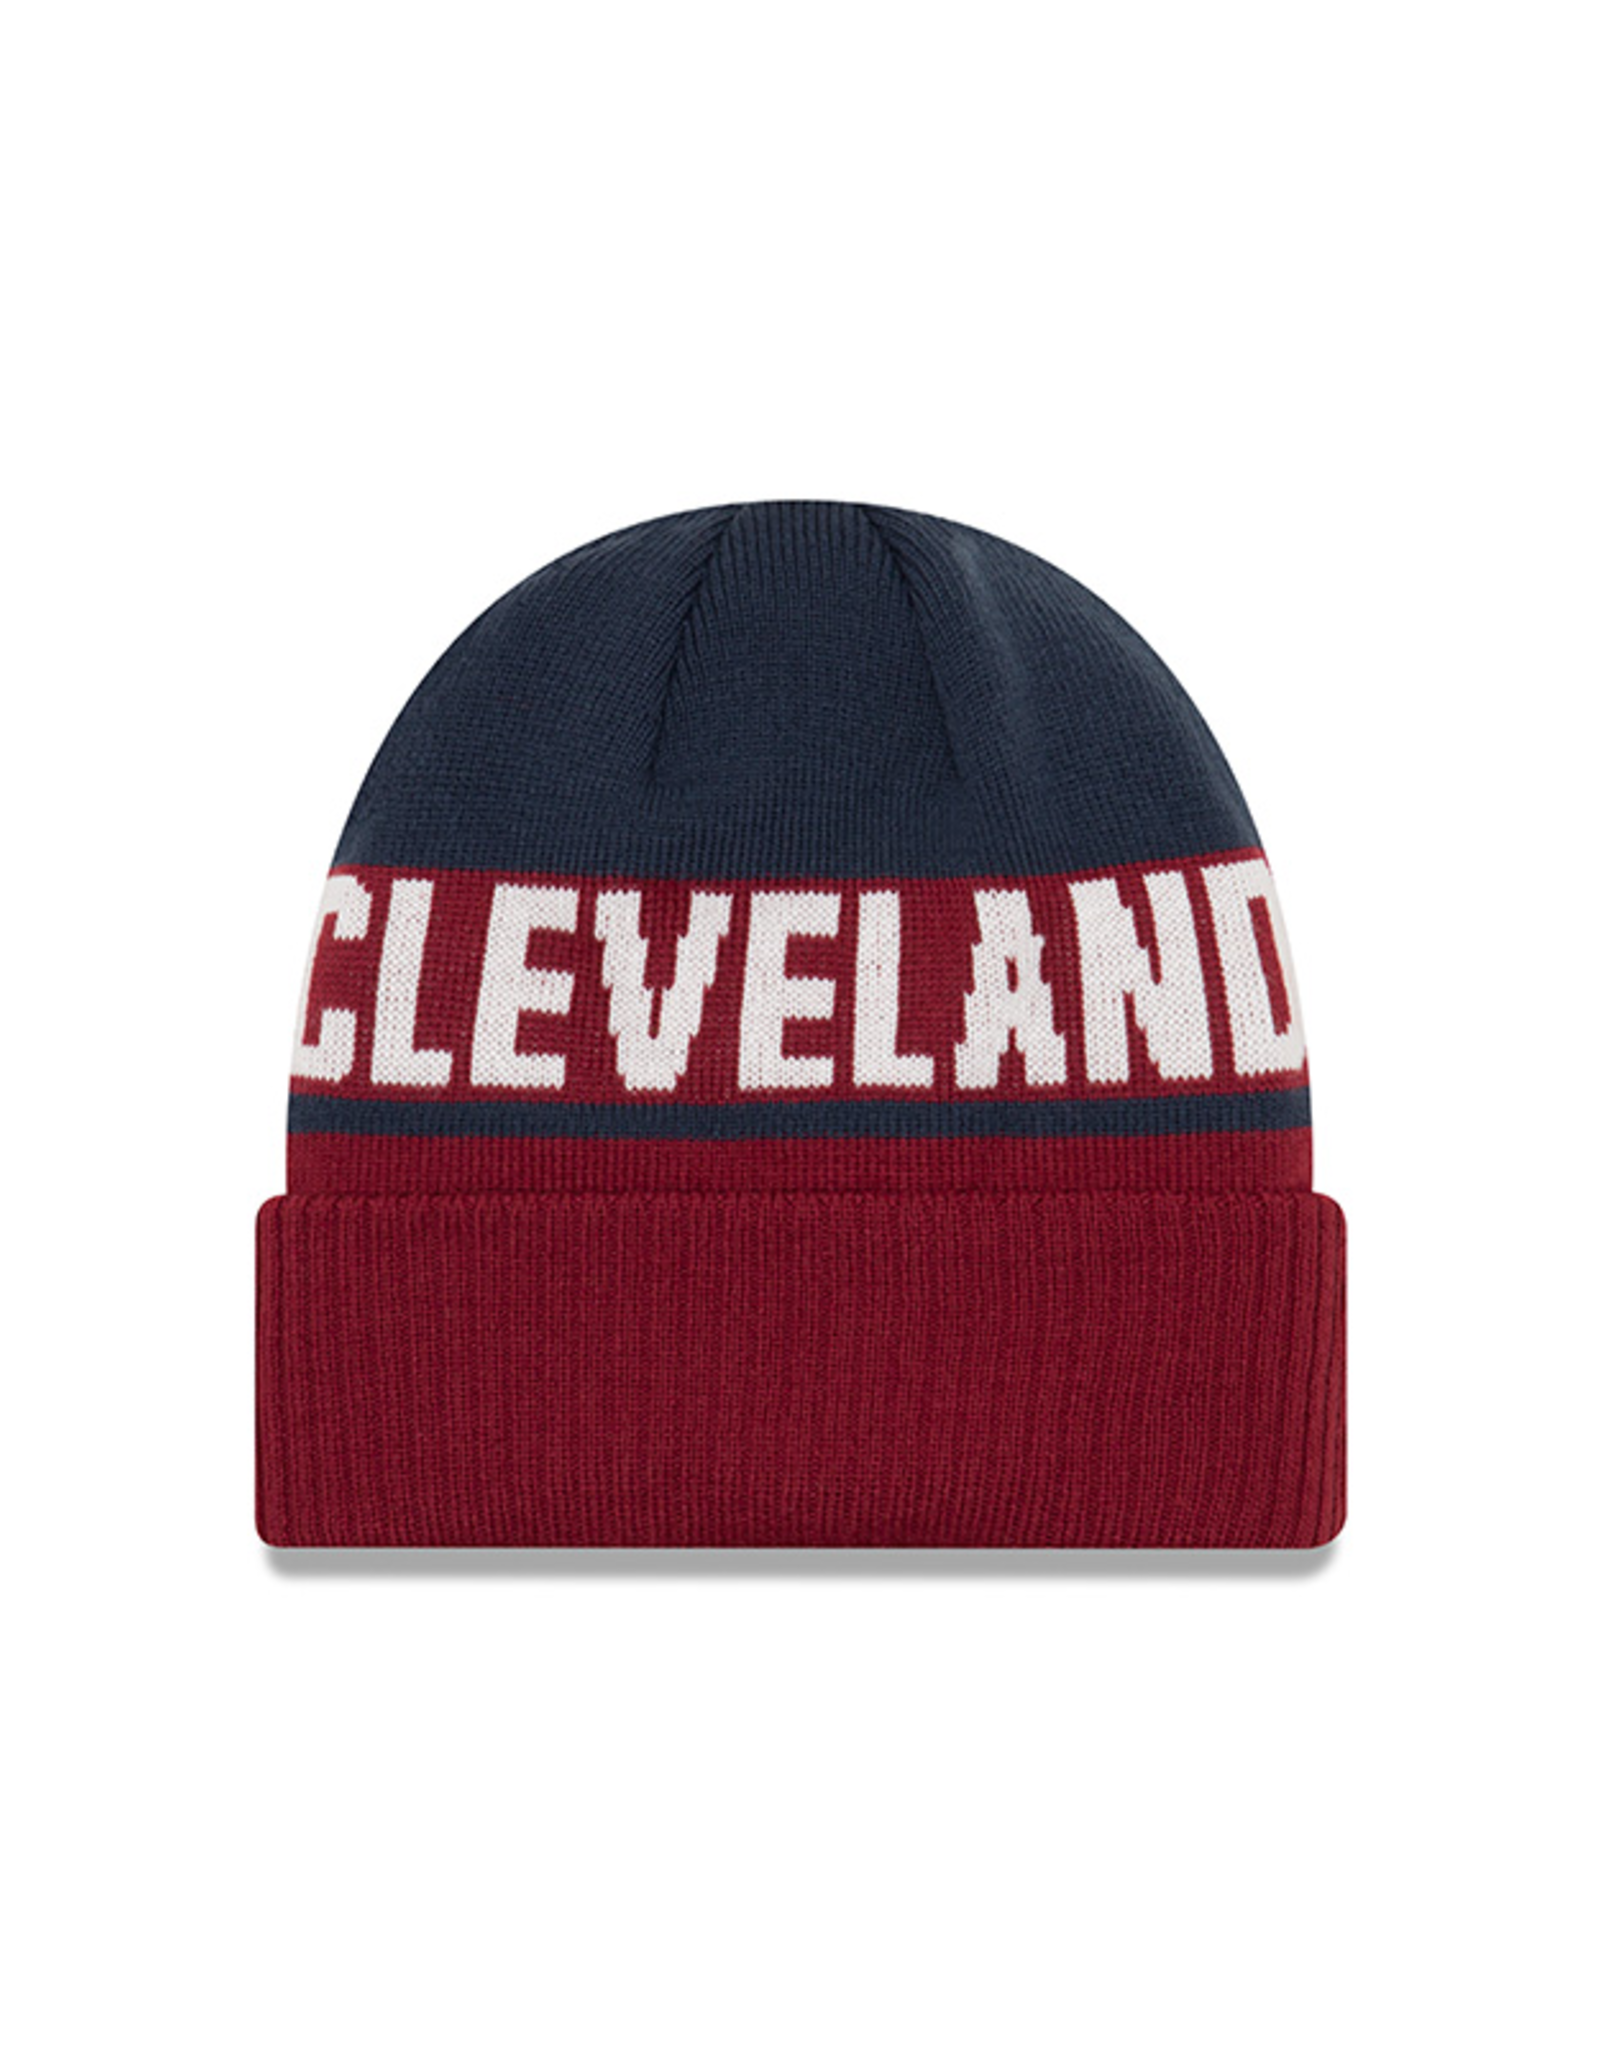 Cleveland Cavaliers Chilled Cuffed Knit